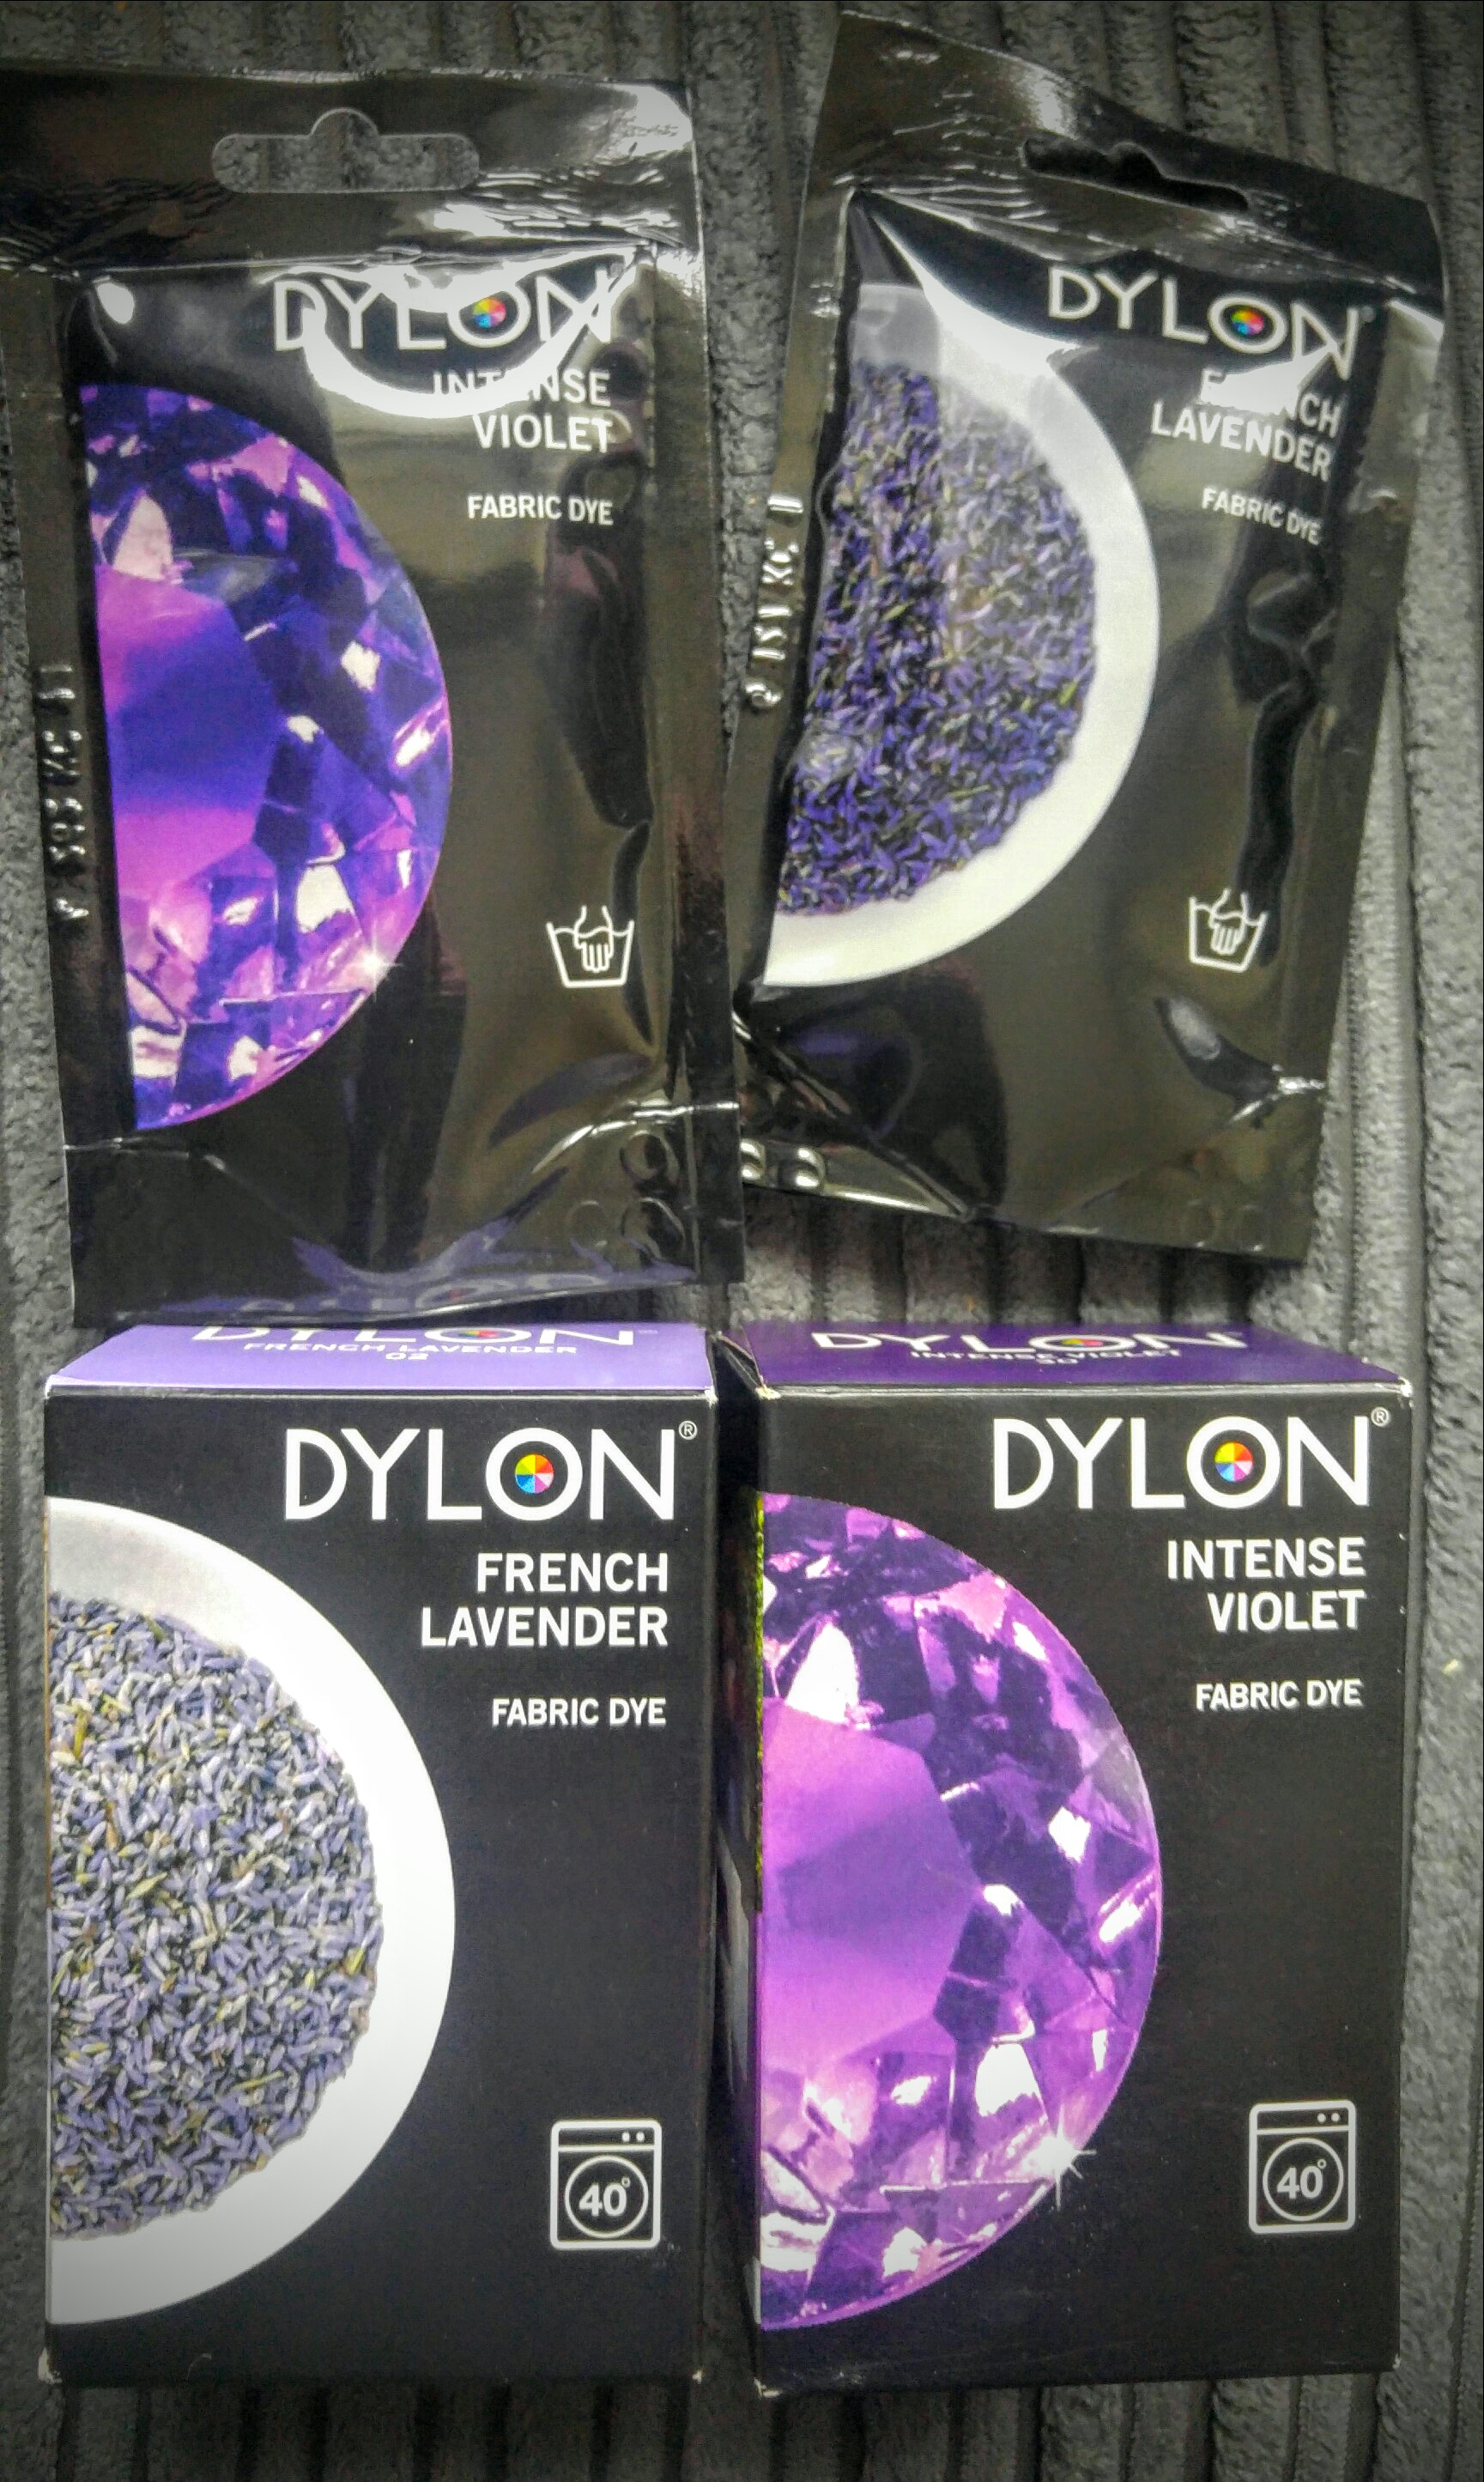 dylon fabric dye review Archives - Relentlessly Purple